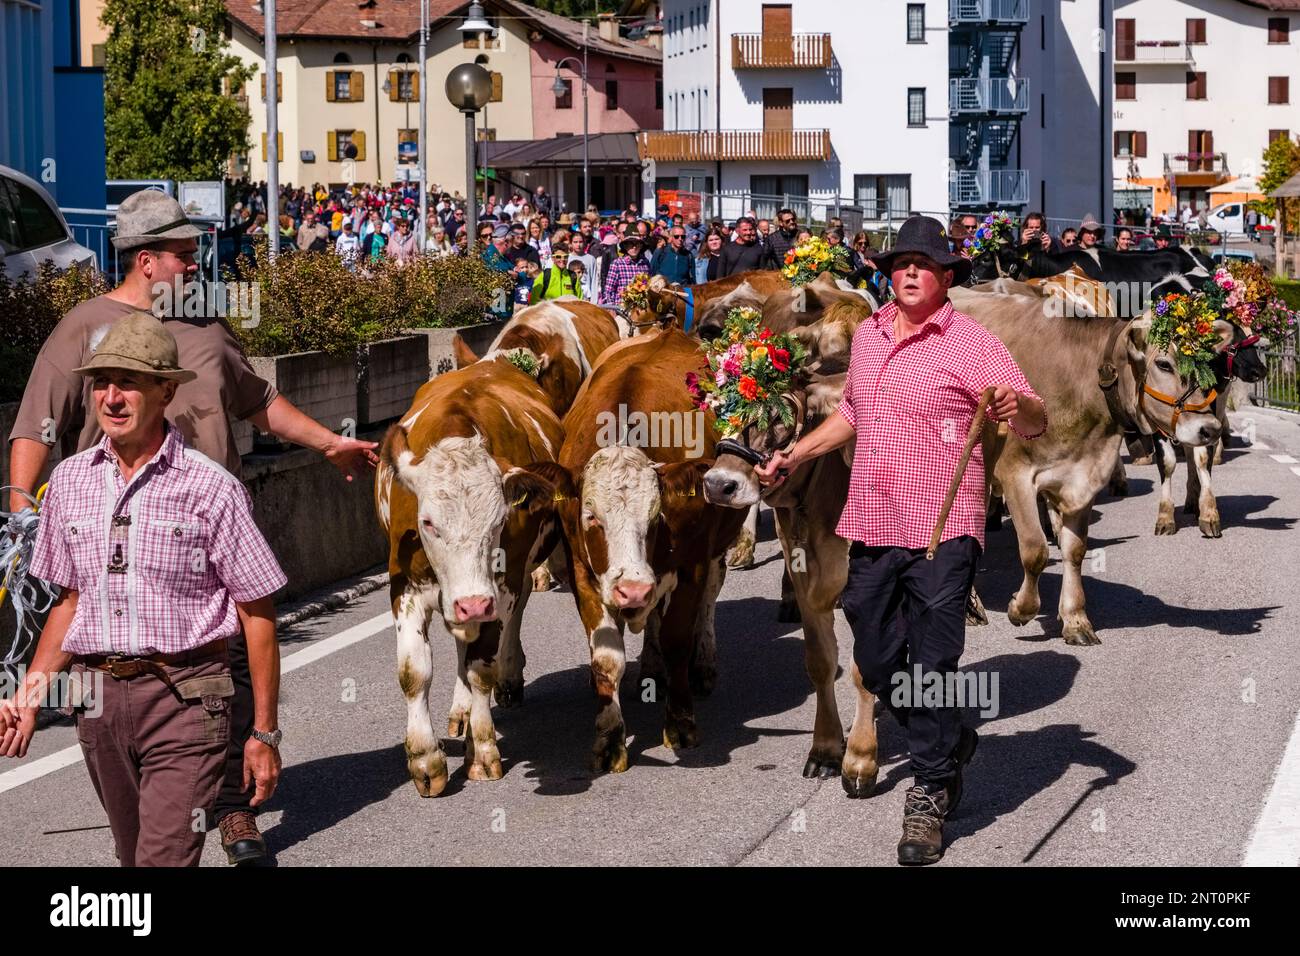 Cowherds guiding the cow herd through the village of Fai della Paganella during the Almabtrieb, the cattle drive from the mountain pasture. Stock Photo